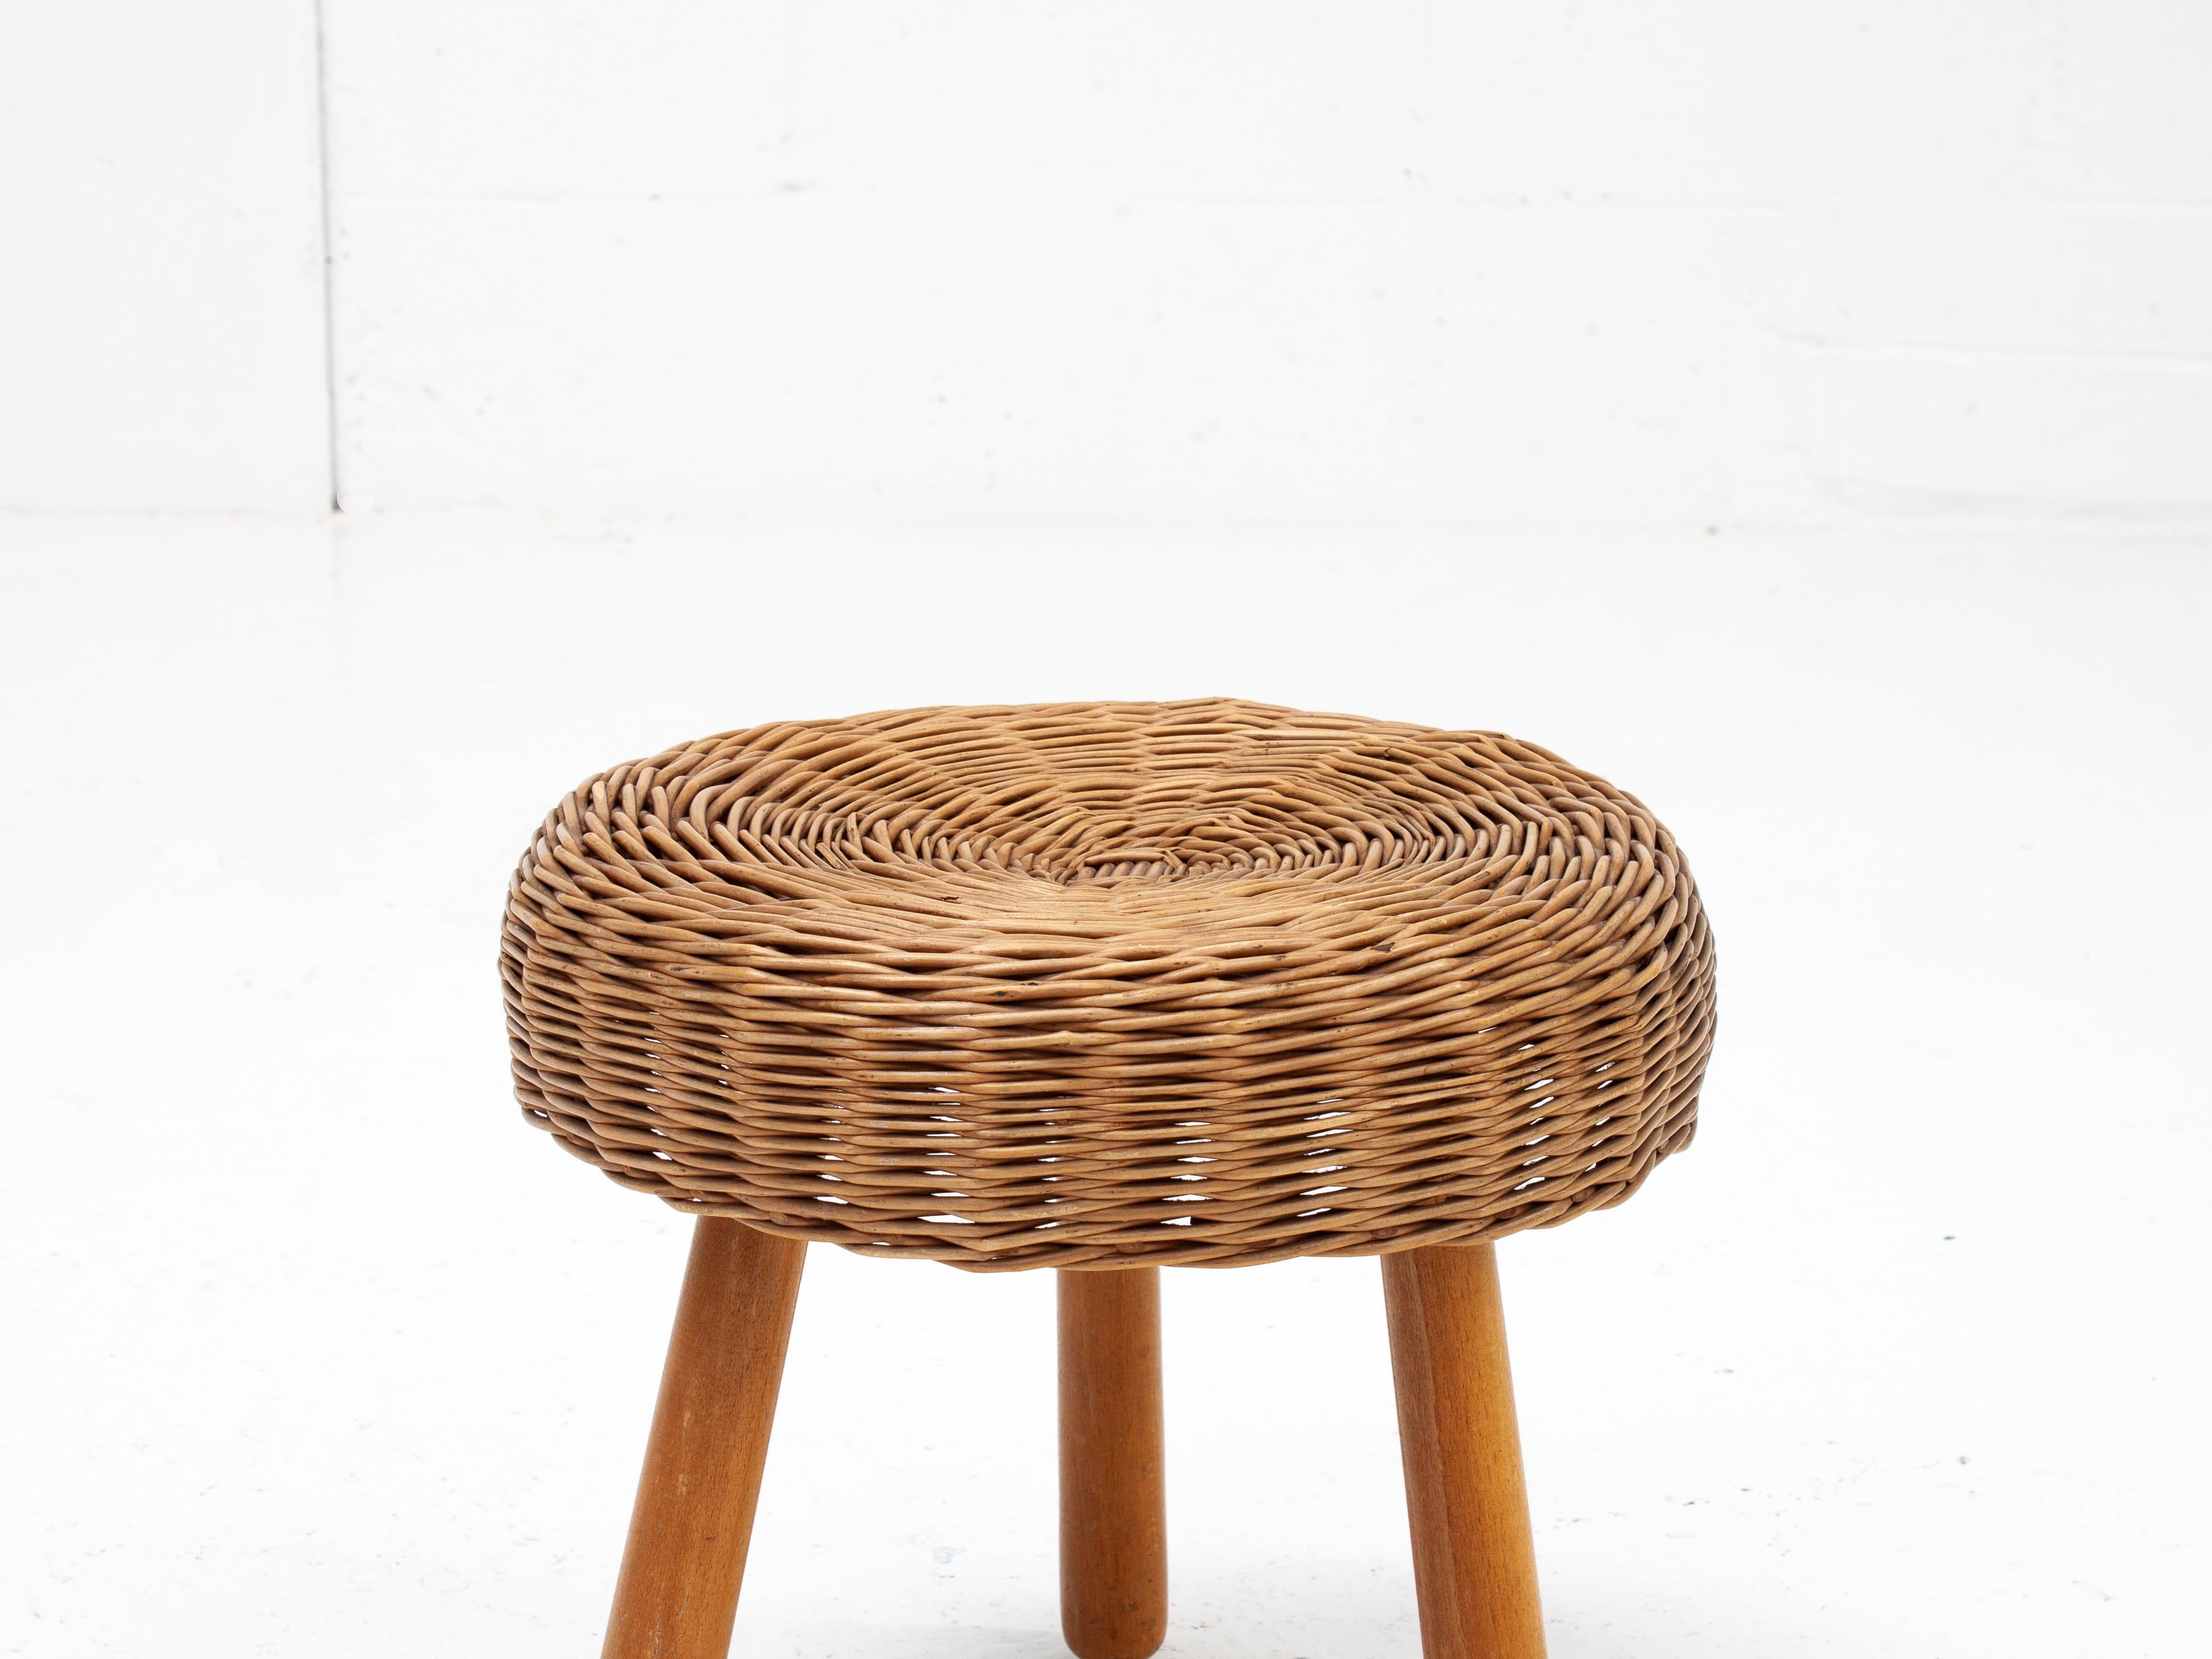 Tony Paul Attributed Wicker Stool, 1950/60s For Sale 1